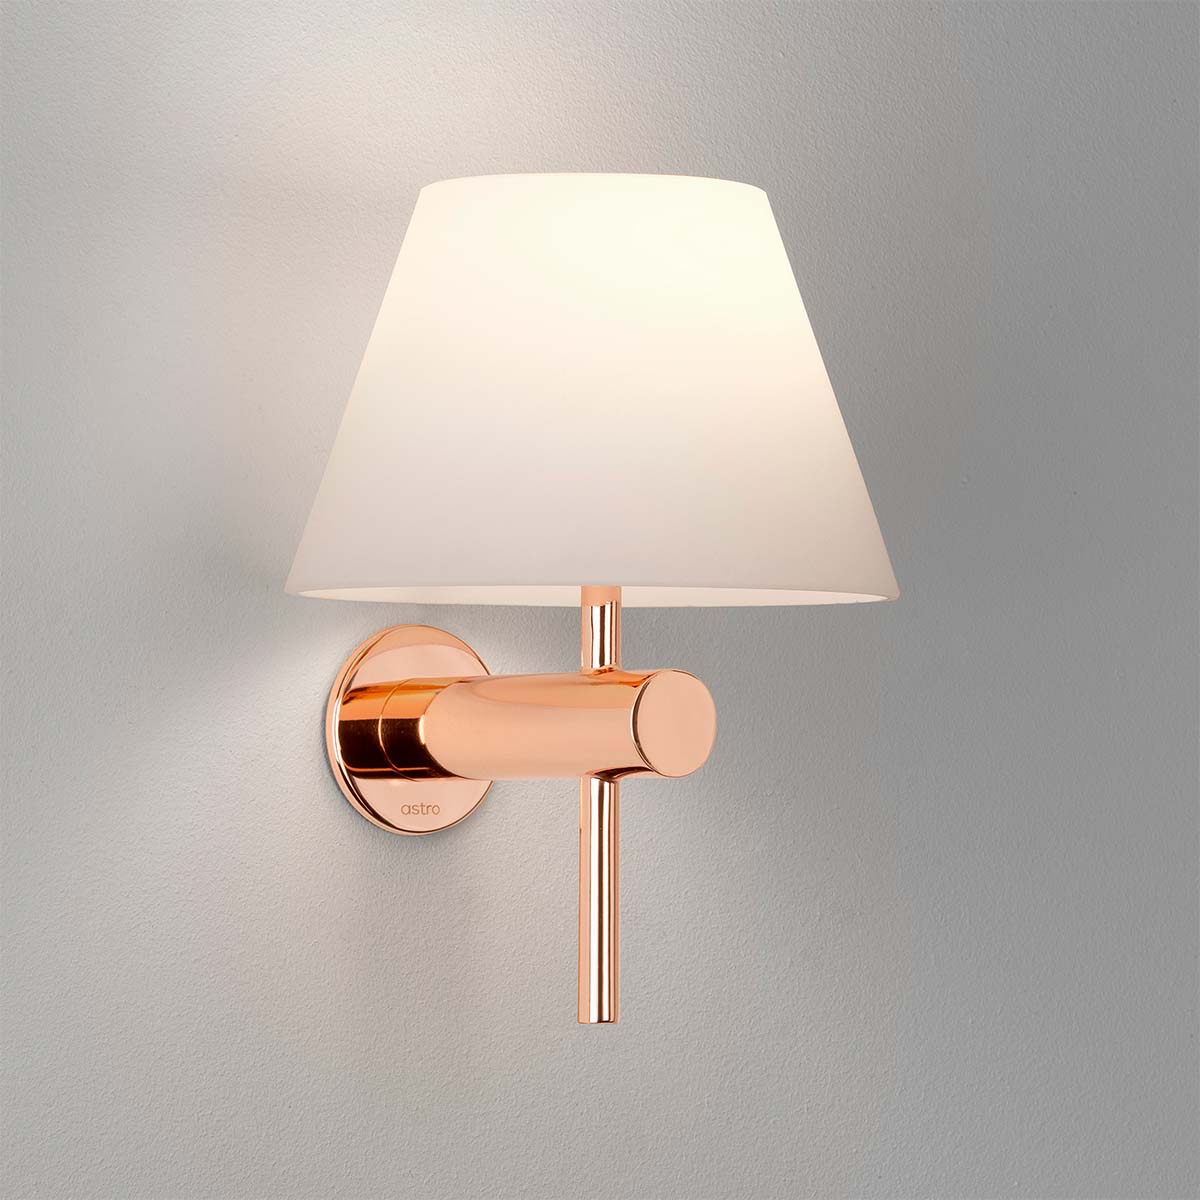 Venice Bathroom Light With White Shade Polished Copper